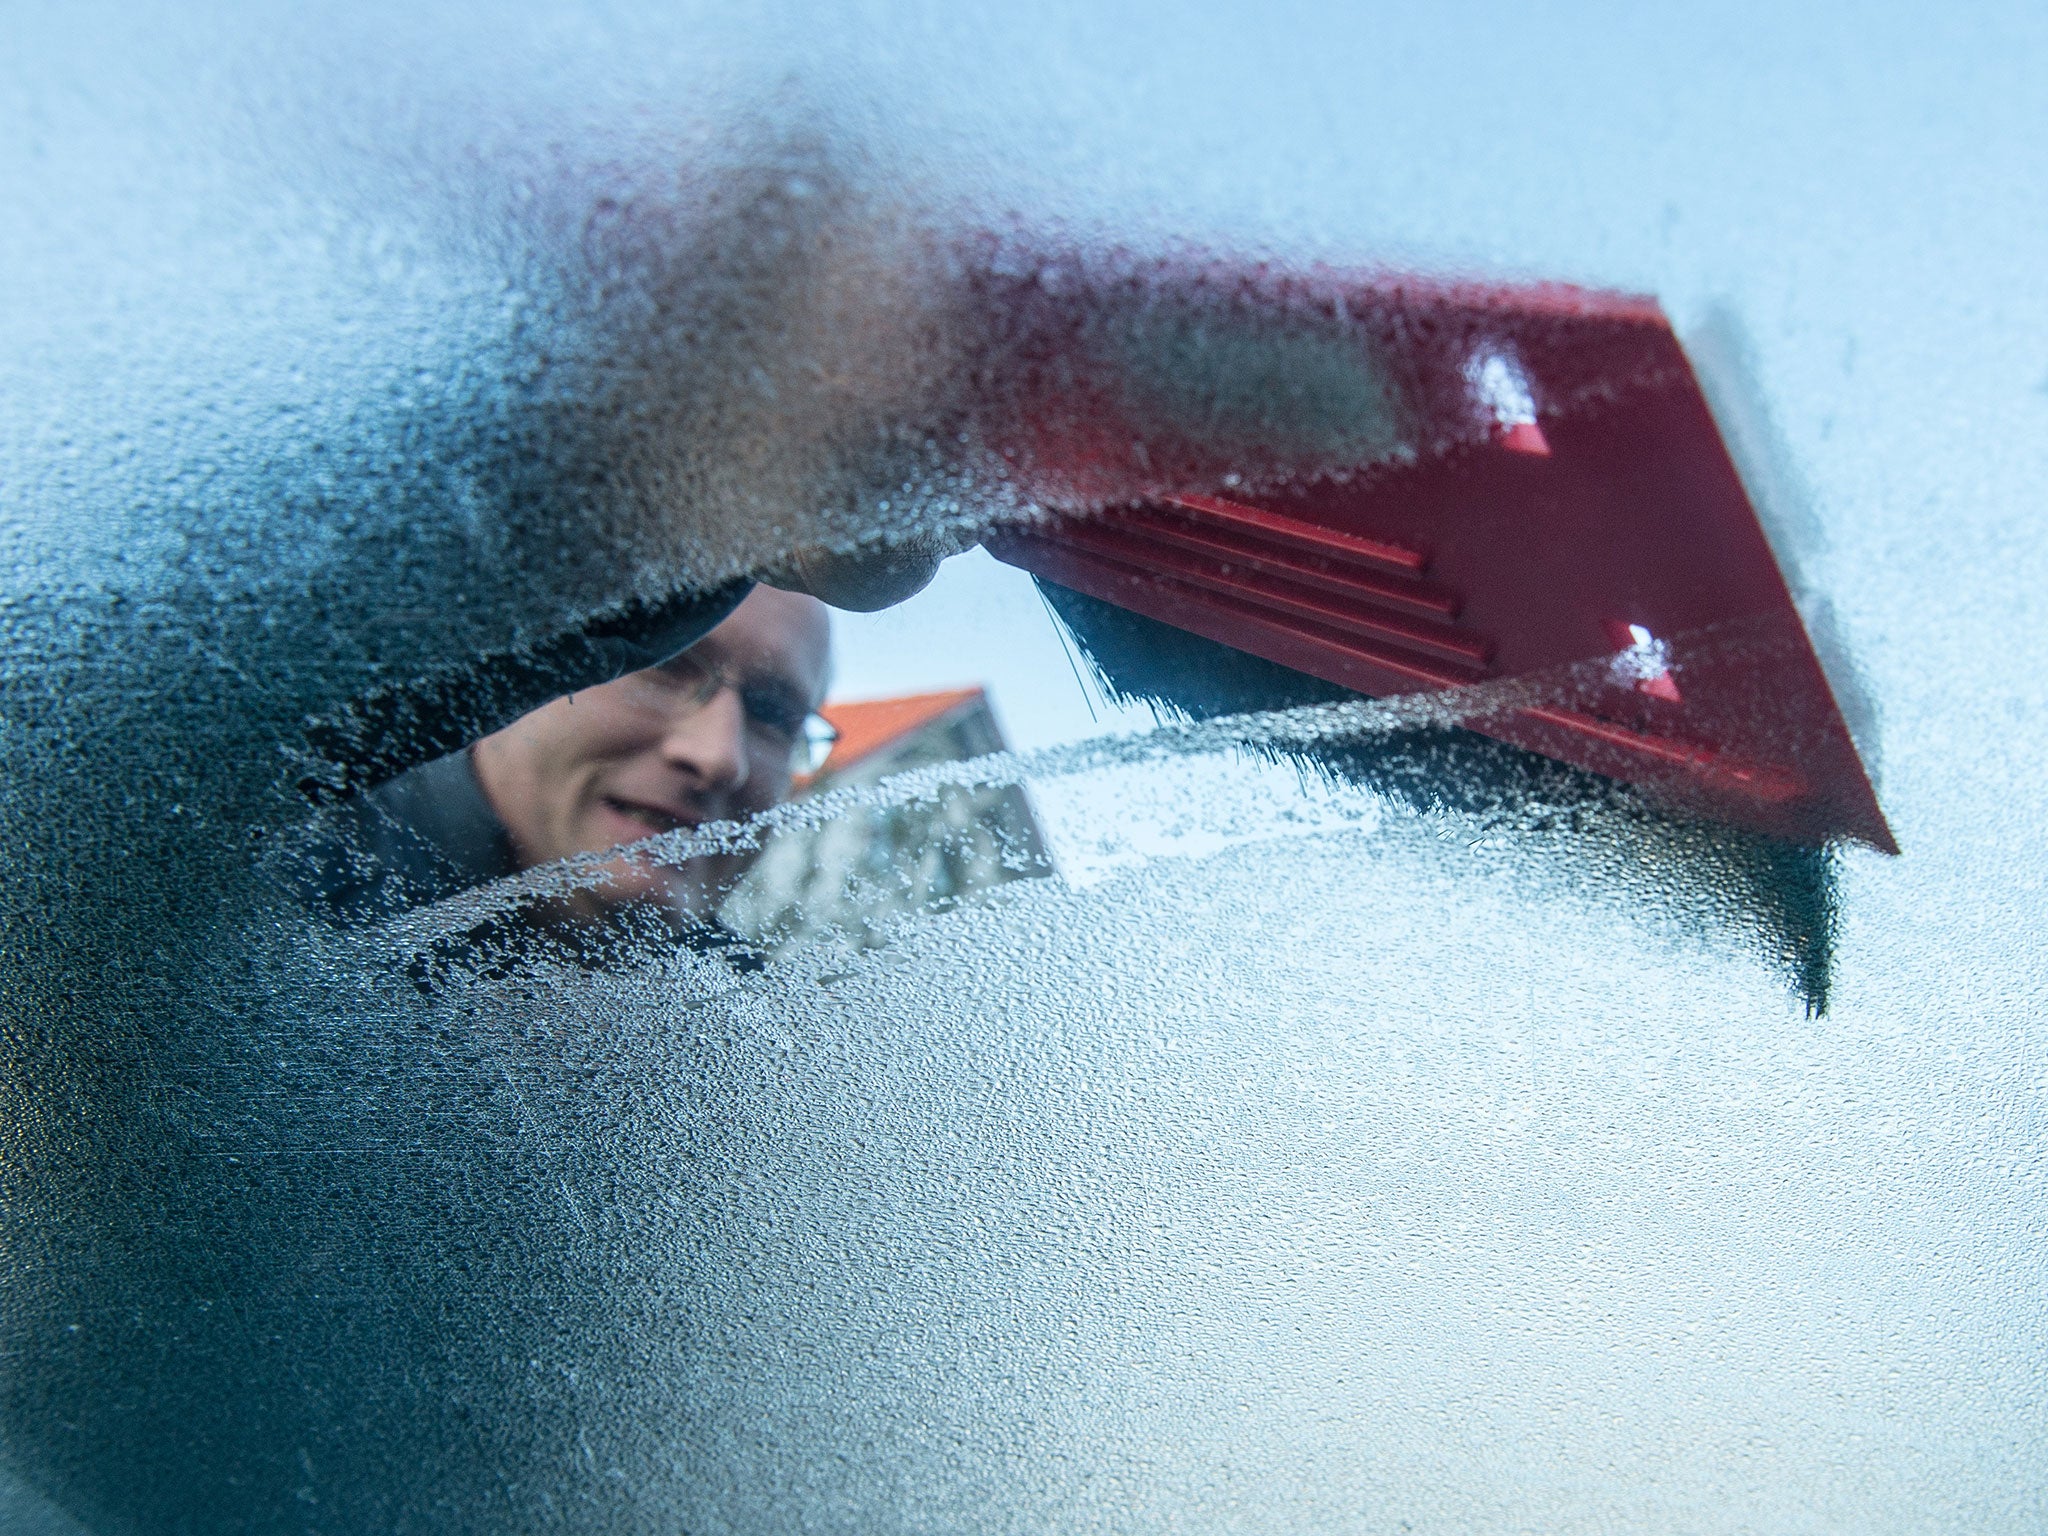 A man removes frost from his windscreen using an ice scraper